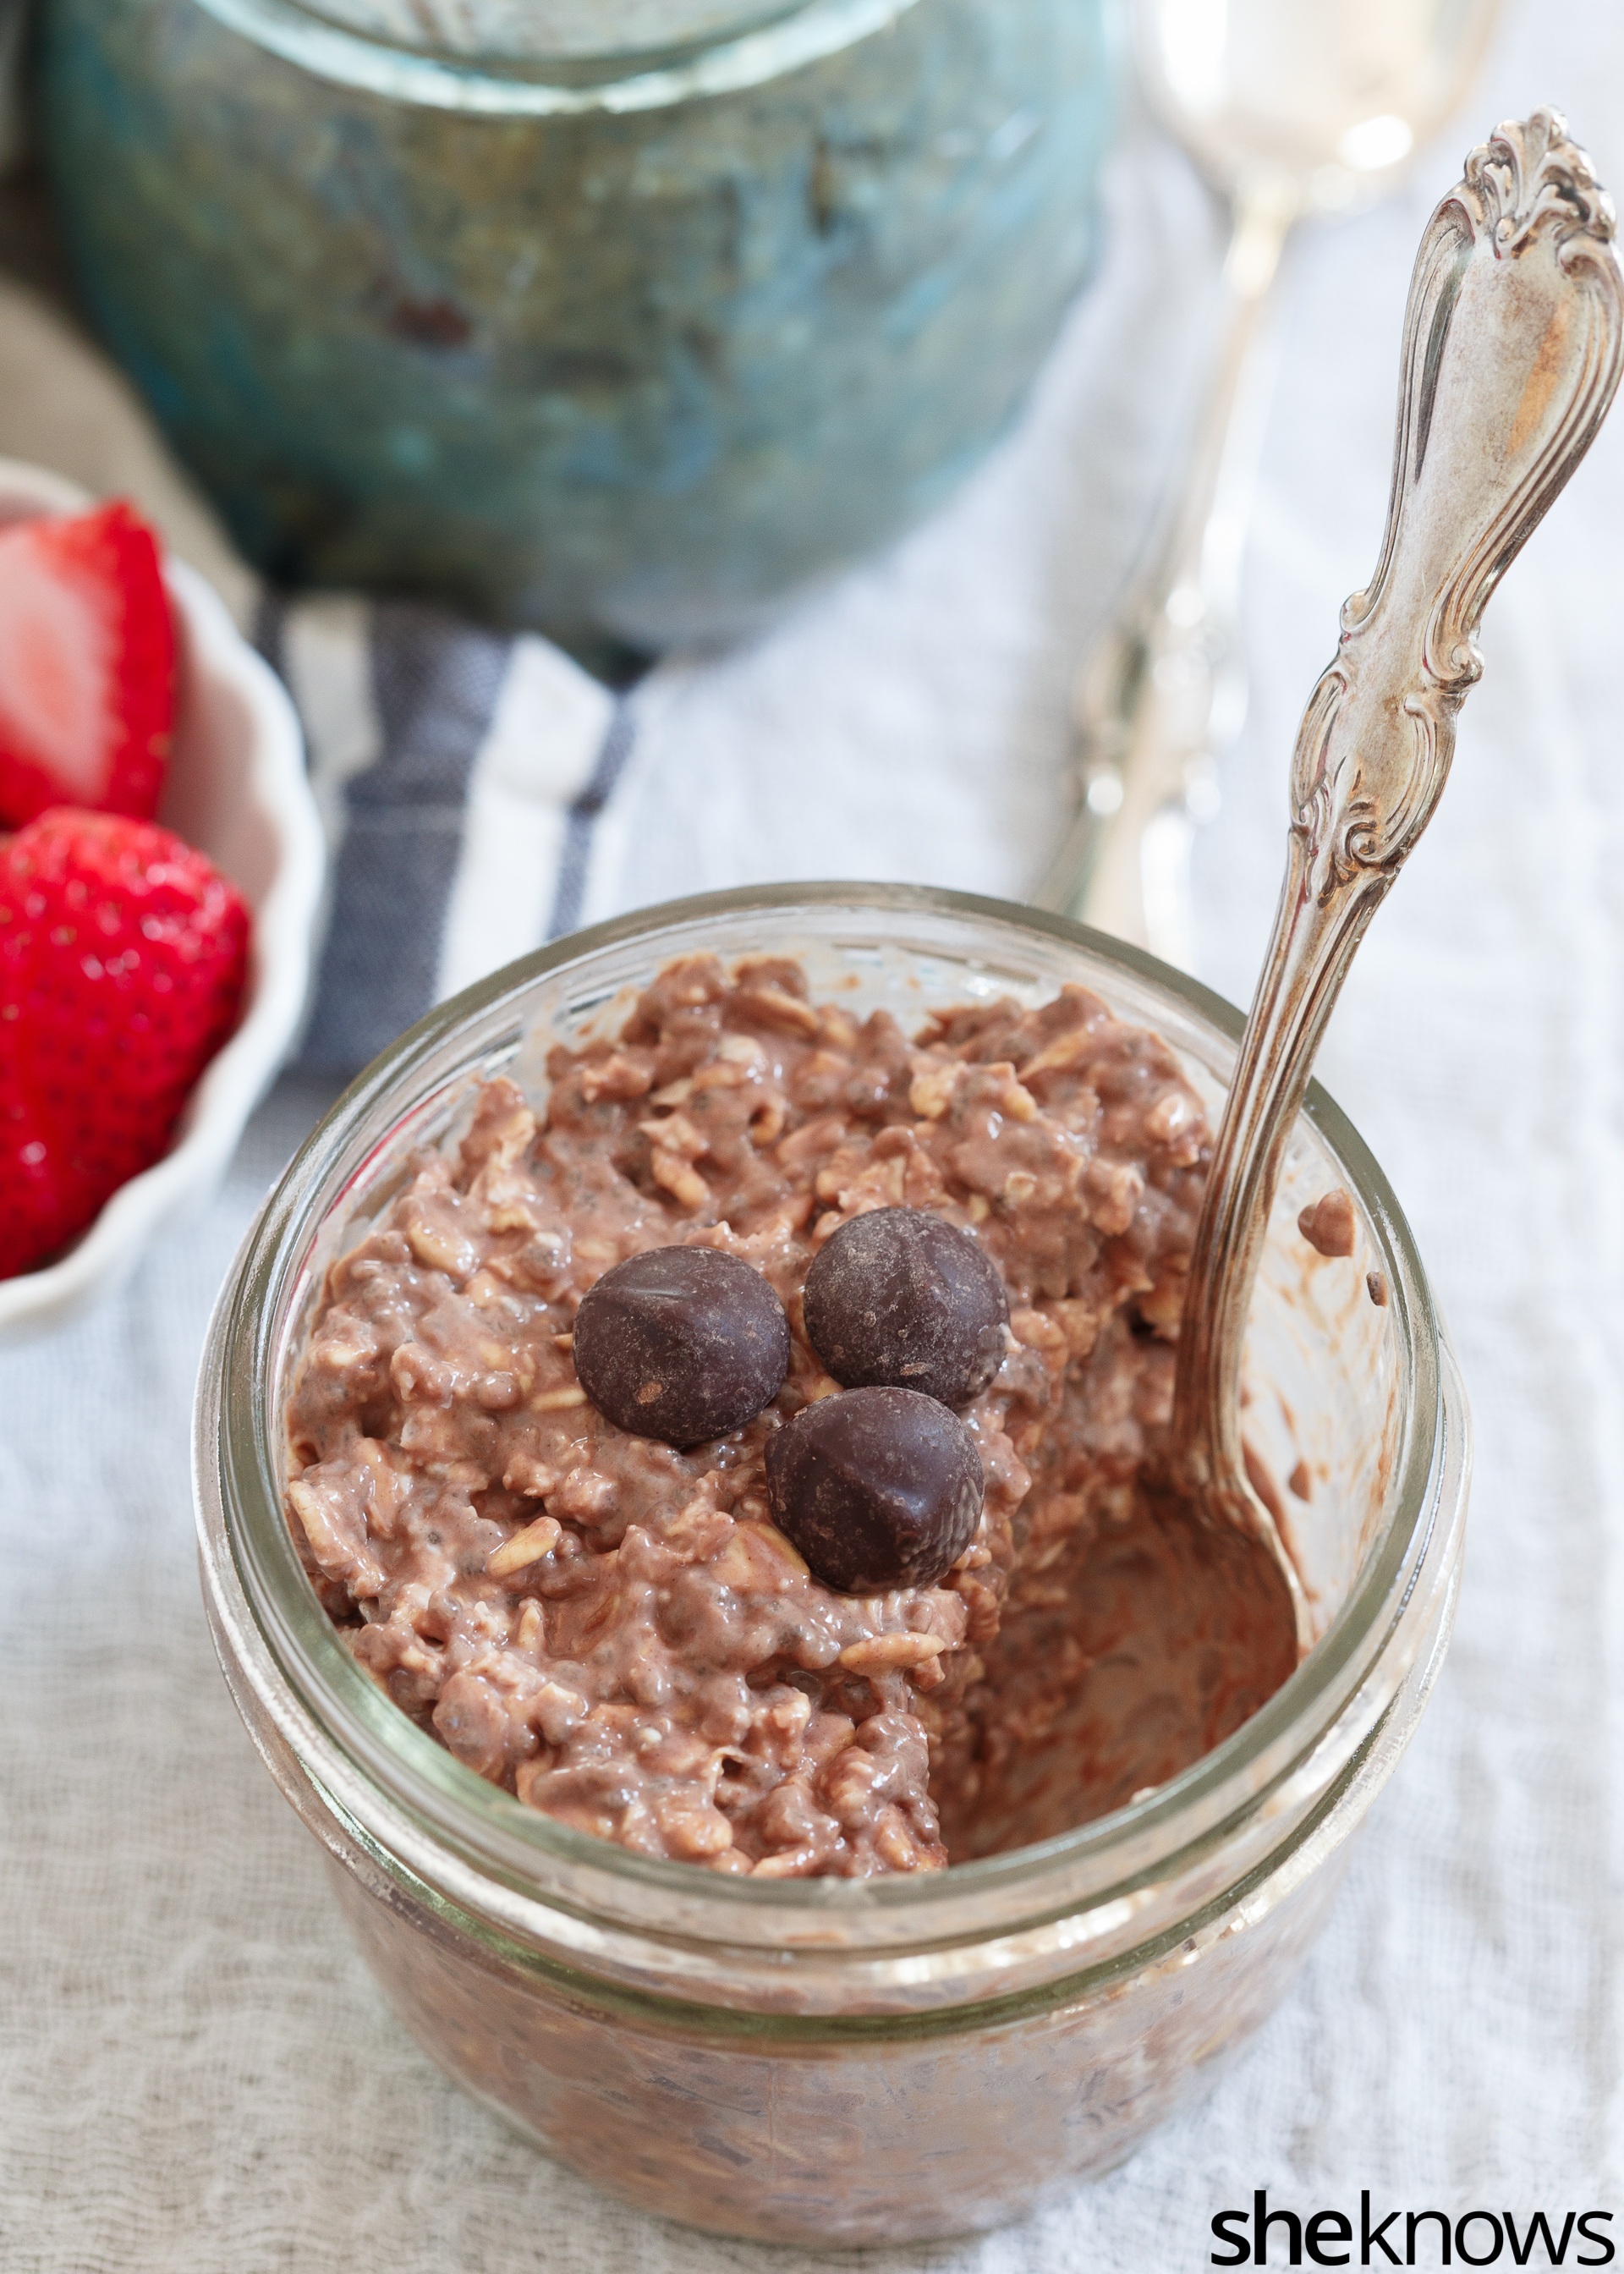 Brownie batter overnight oats make chocolate for breakfast fully acceptable